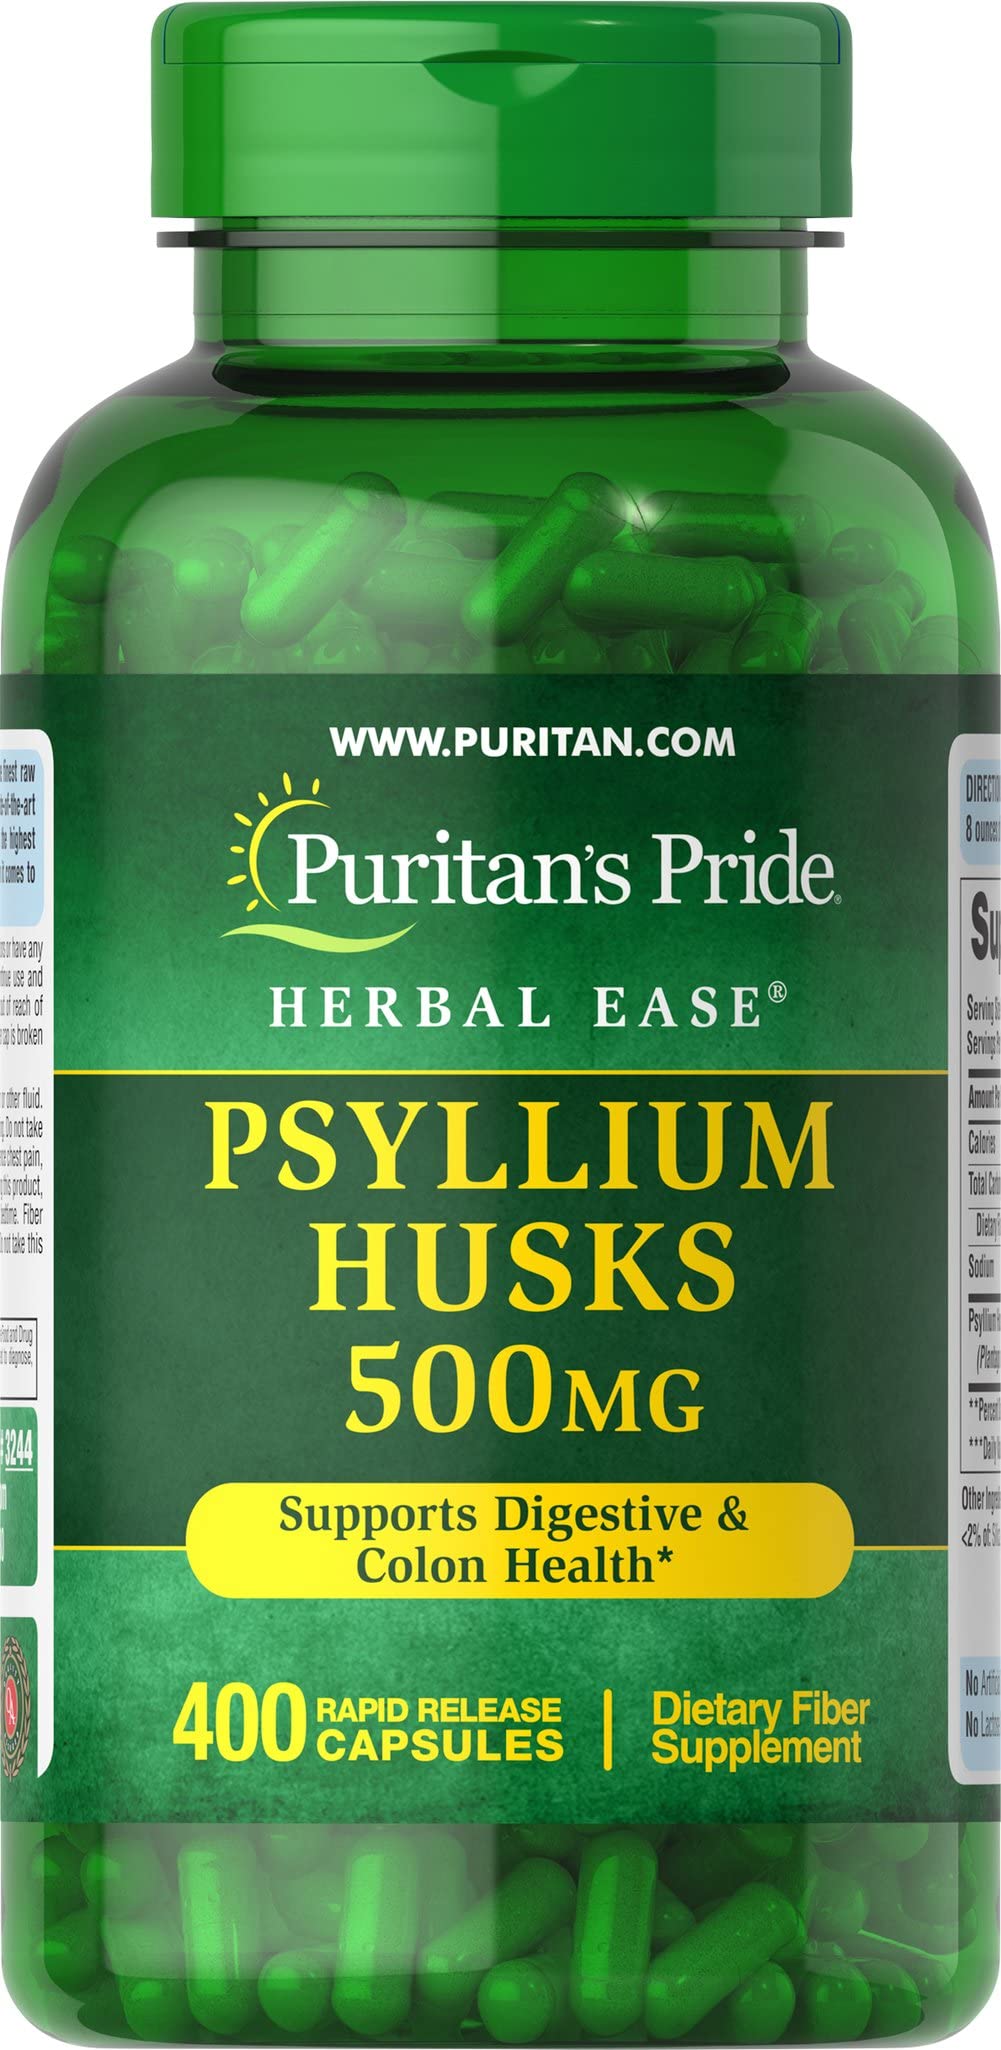 Amazon 35% Off Subscribe & Save Puritan's Pride Psyllium Husks 500 Mg Supports Digestive and Colon Health 400 ct $8.39